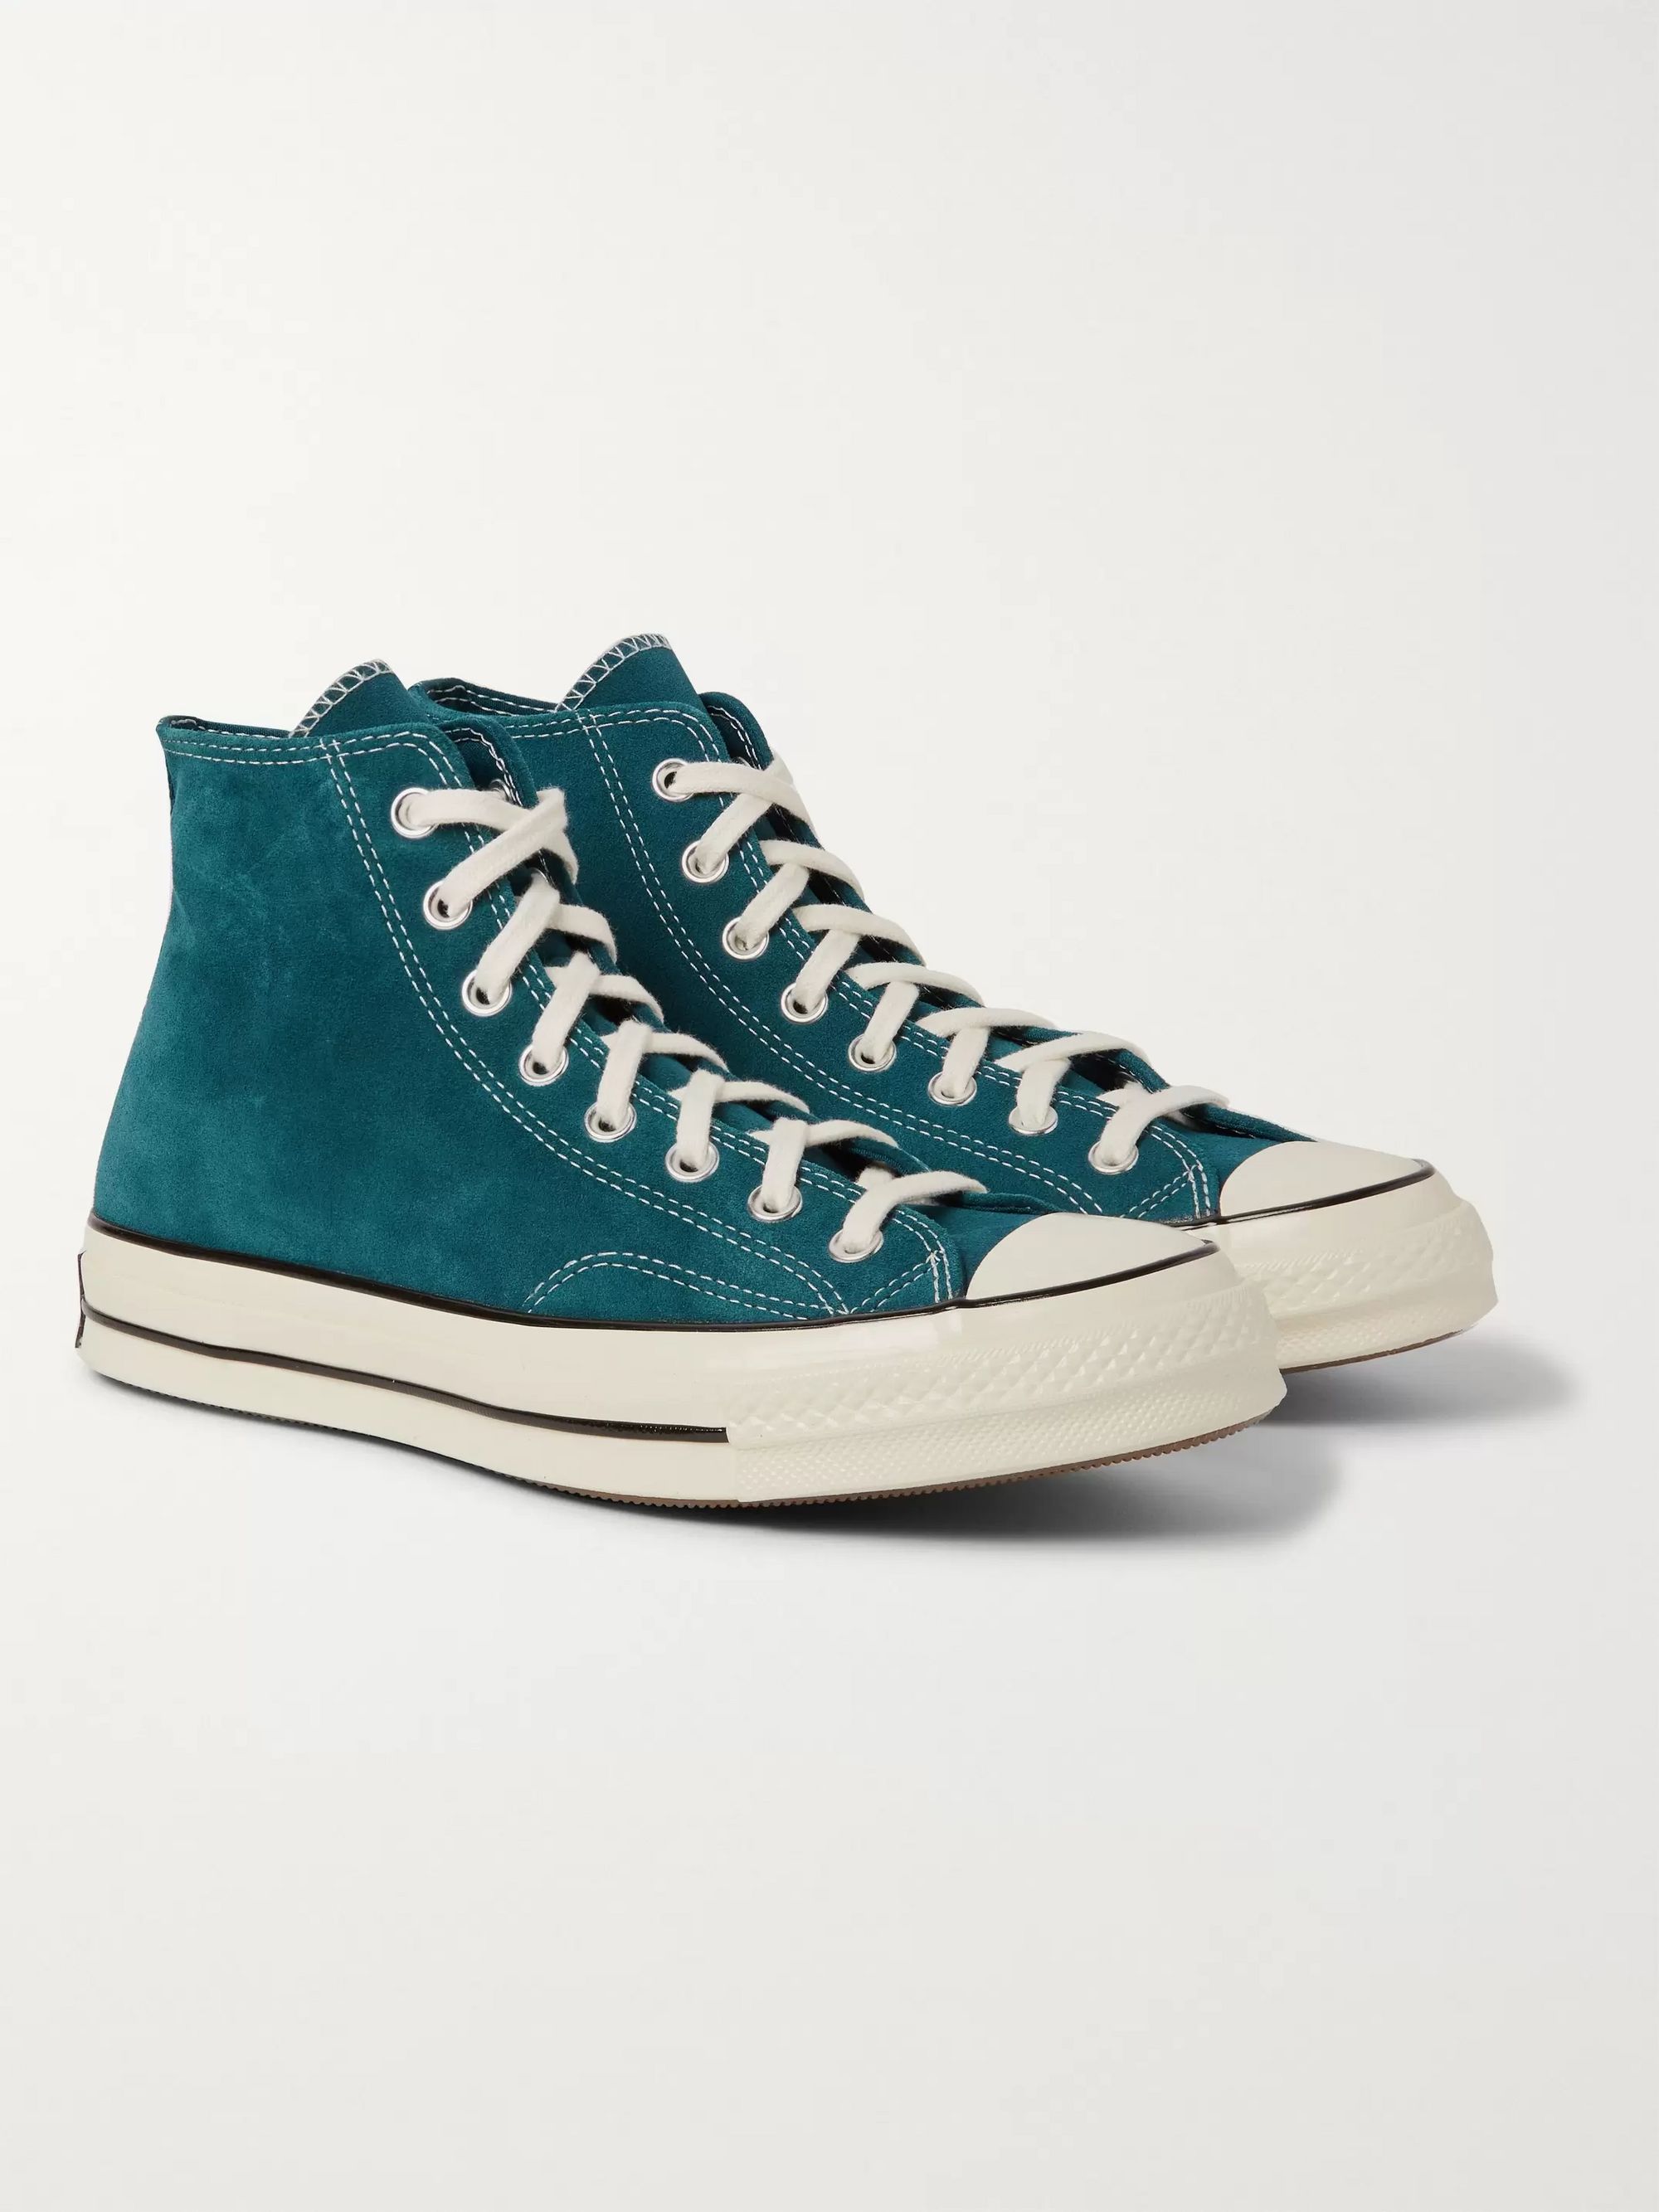 high top converse turquoise Online Shopping for Women, Men, Kids ...